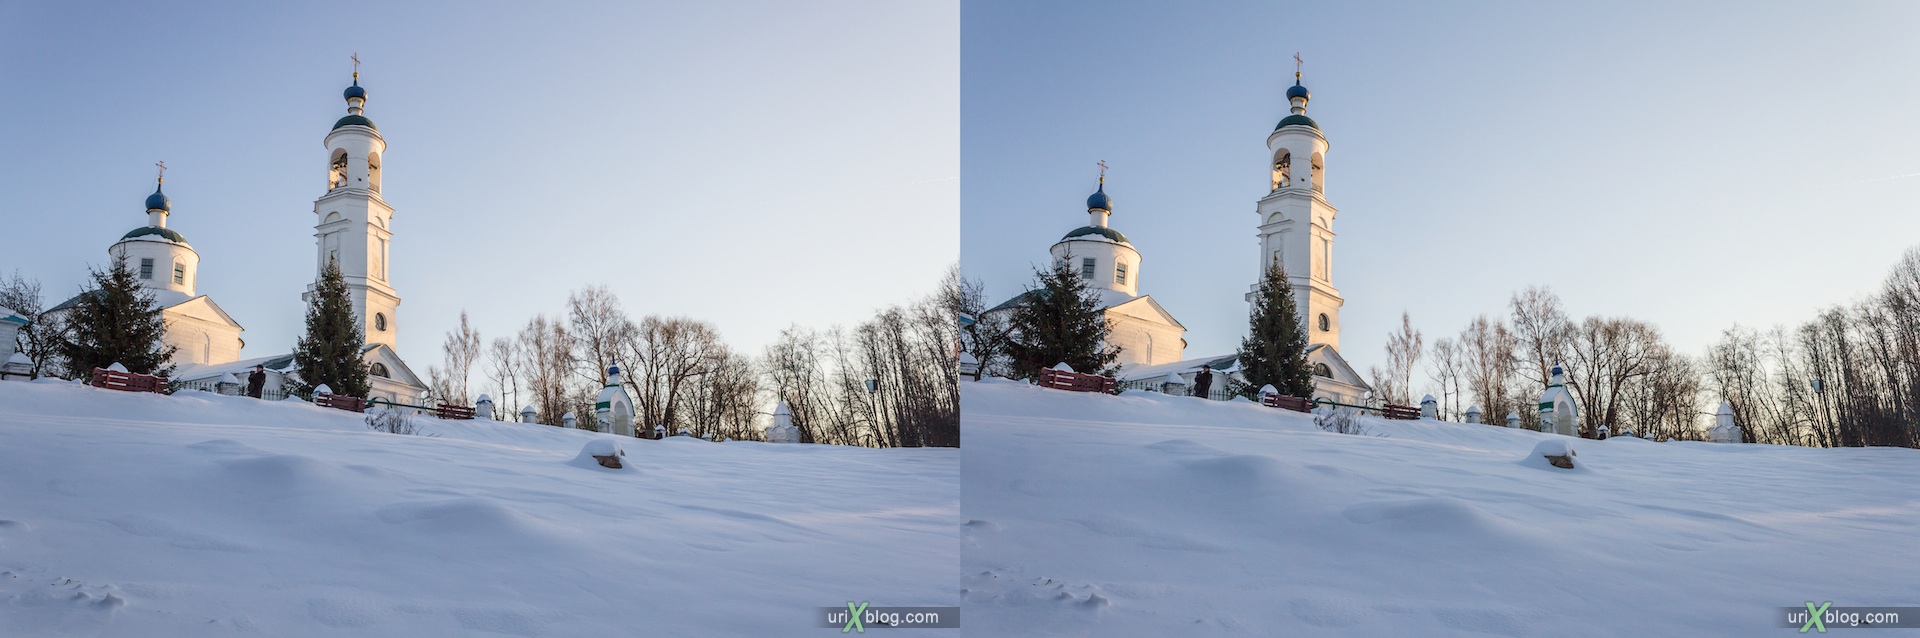 2012, Iosifo-Volotsky monastery, Moscow region, Russia, church, snow, winter, sunny, cold, 3D, stereo pair, cross-eyed, crossview, cross view stereo pair